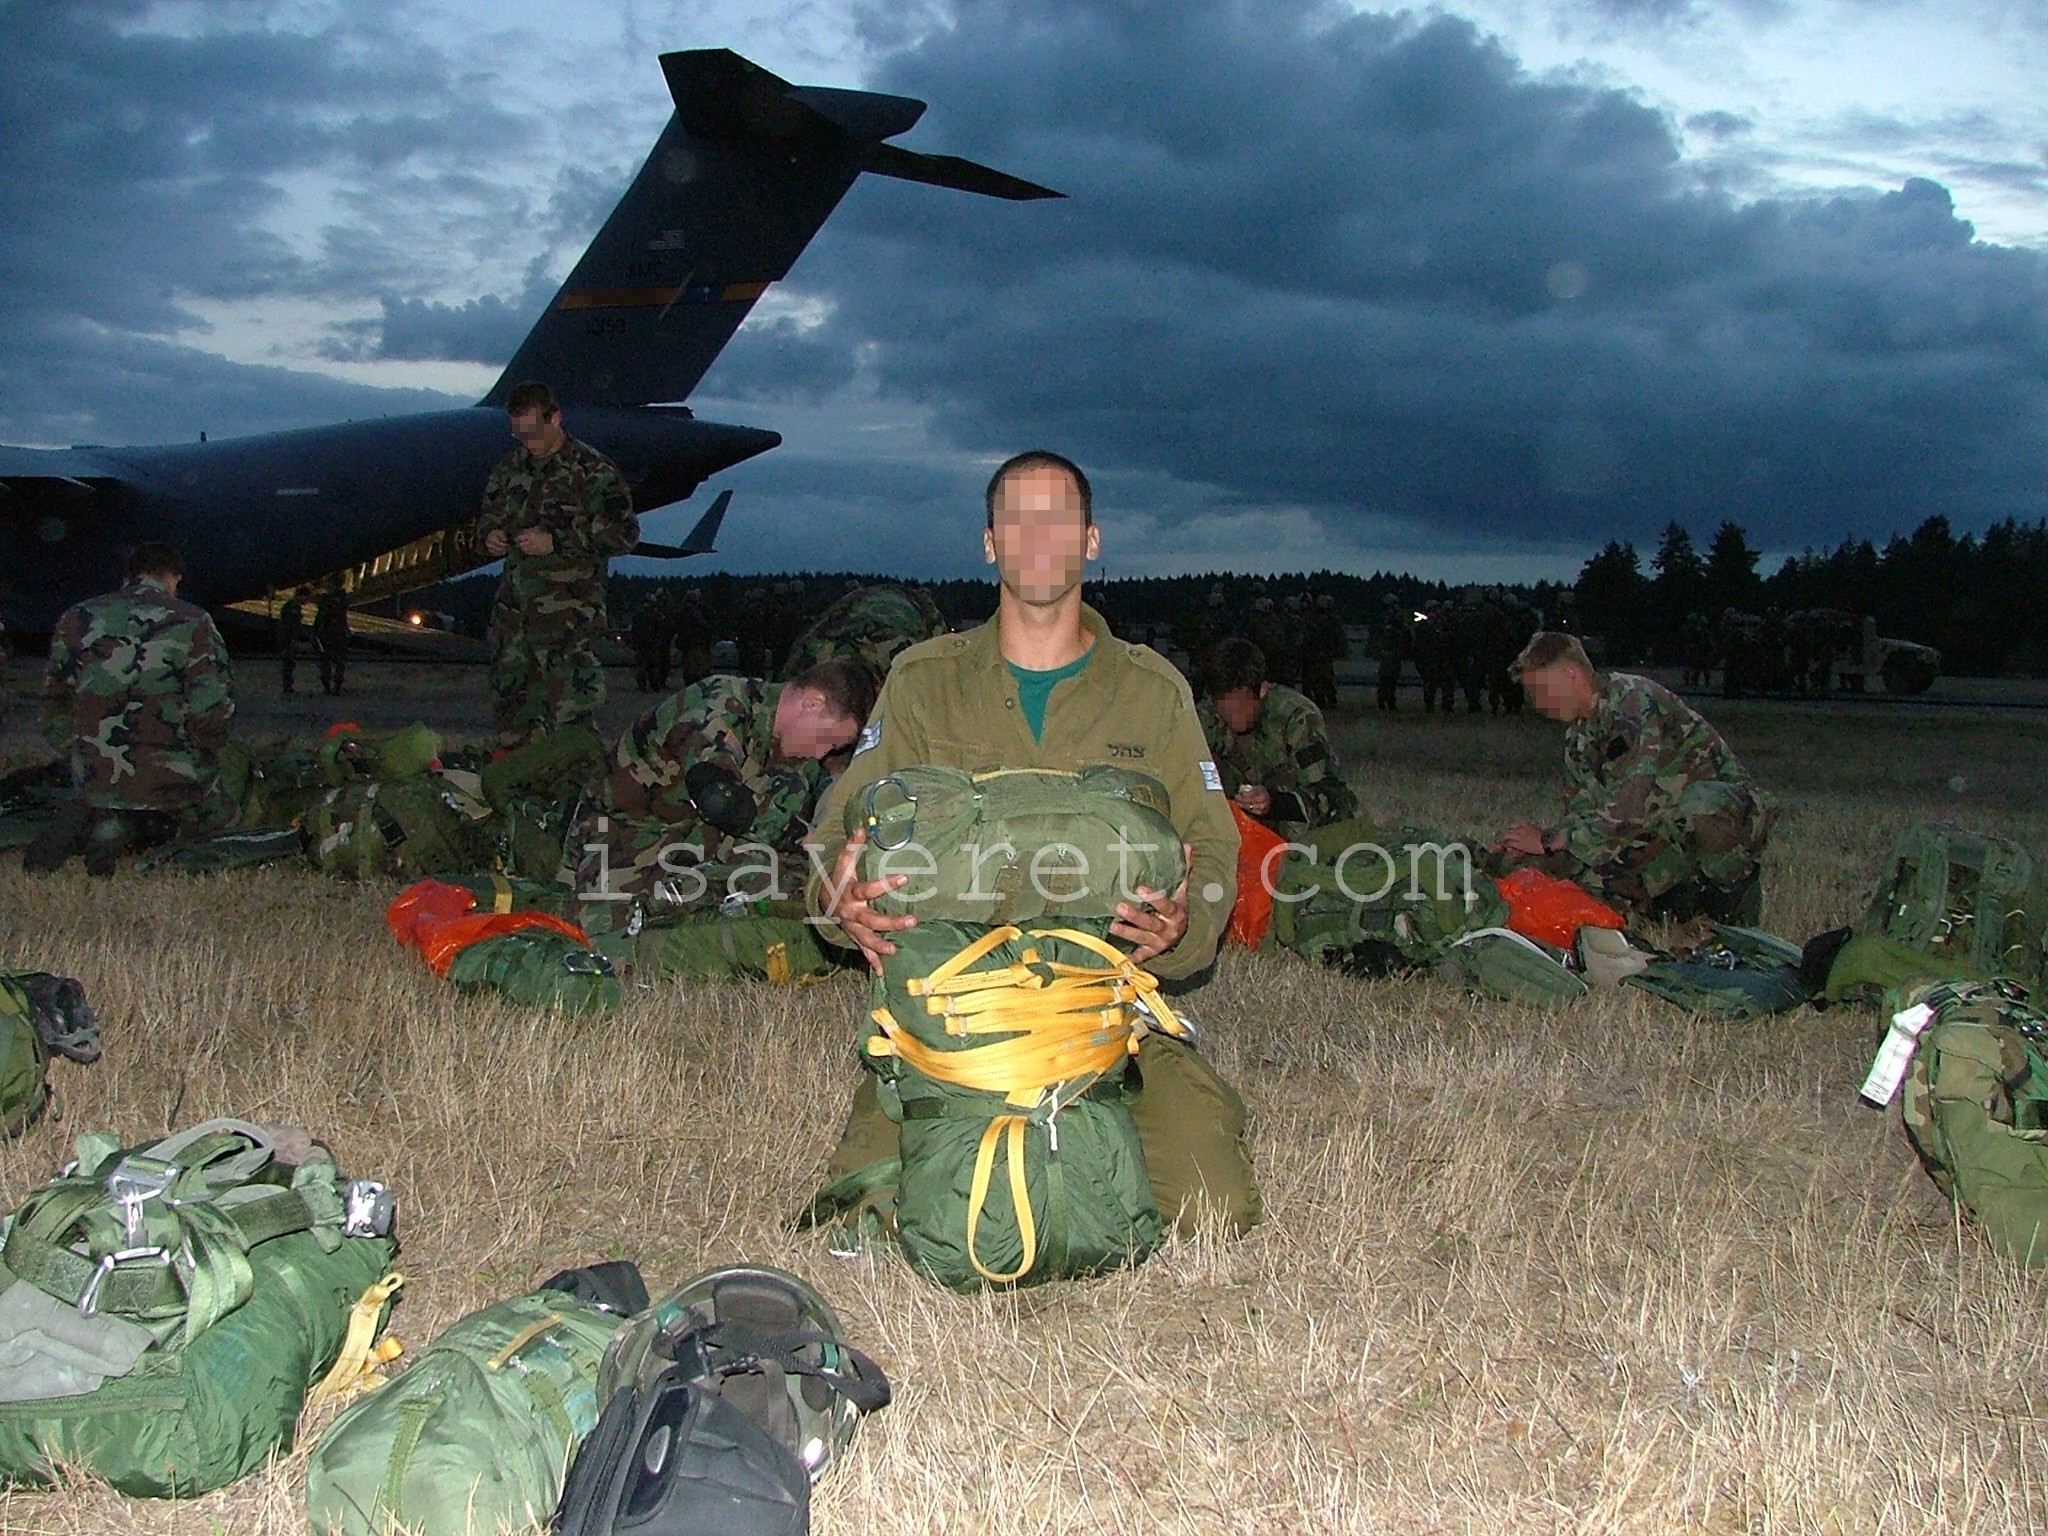 YAHALOM operator (foreground) and U.S. Army Special Forces operators  (background) prepare for parachuting during joint training.